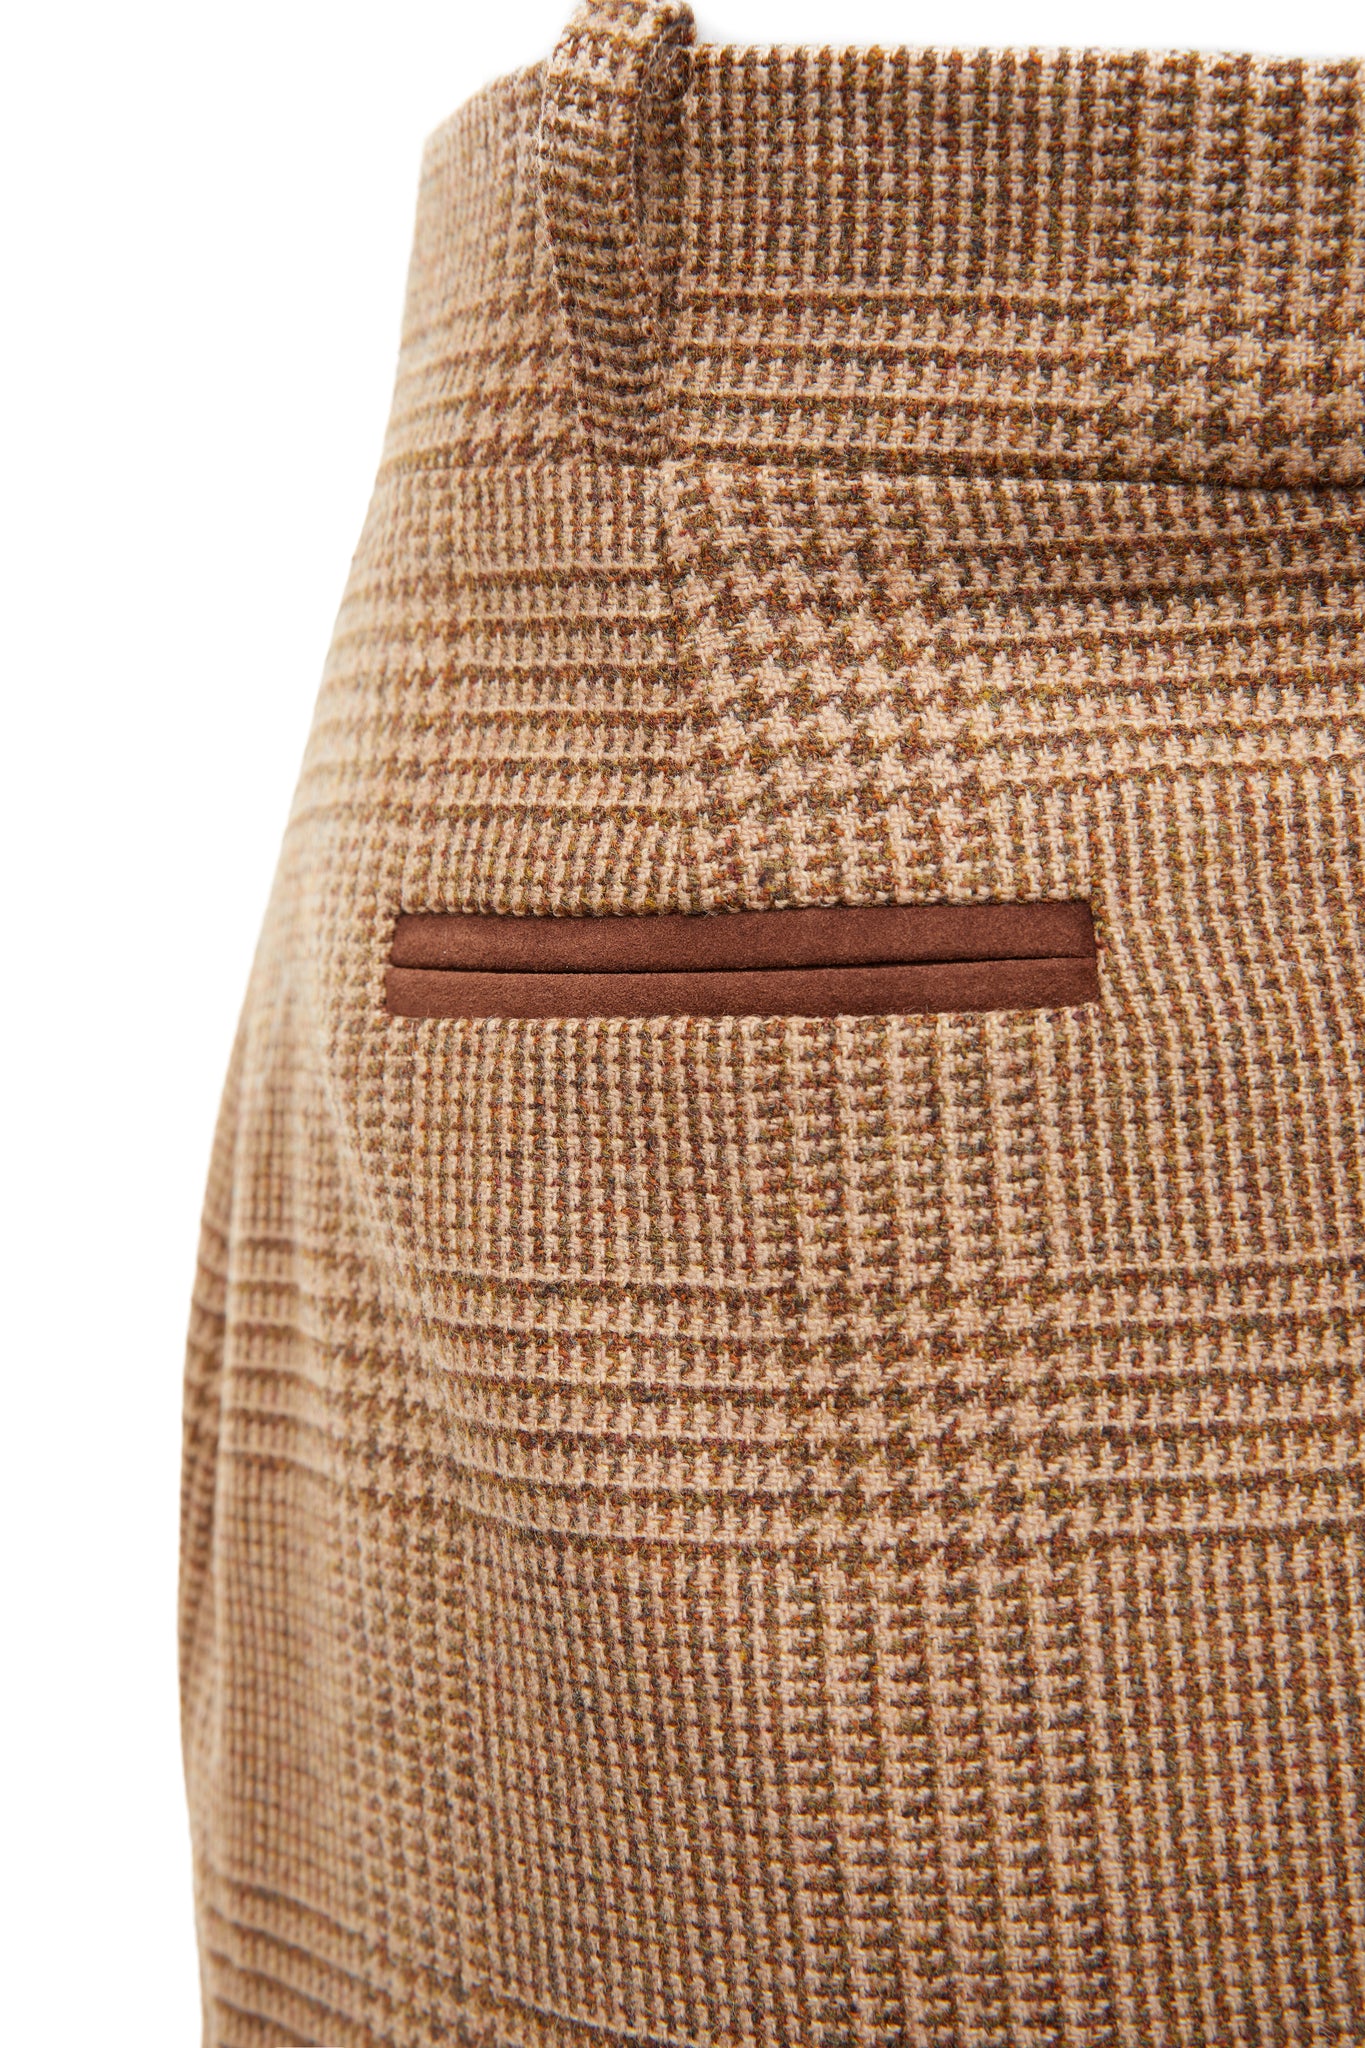 back faux pocket detail of womens light brown check wool pencil mini skirt with concealed zip fastening on centre back and gold rivets down front